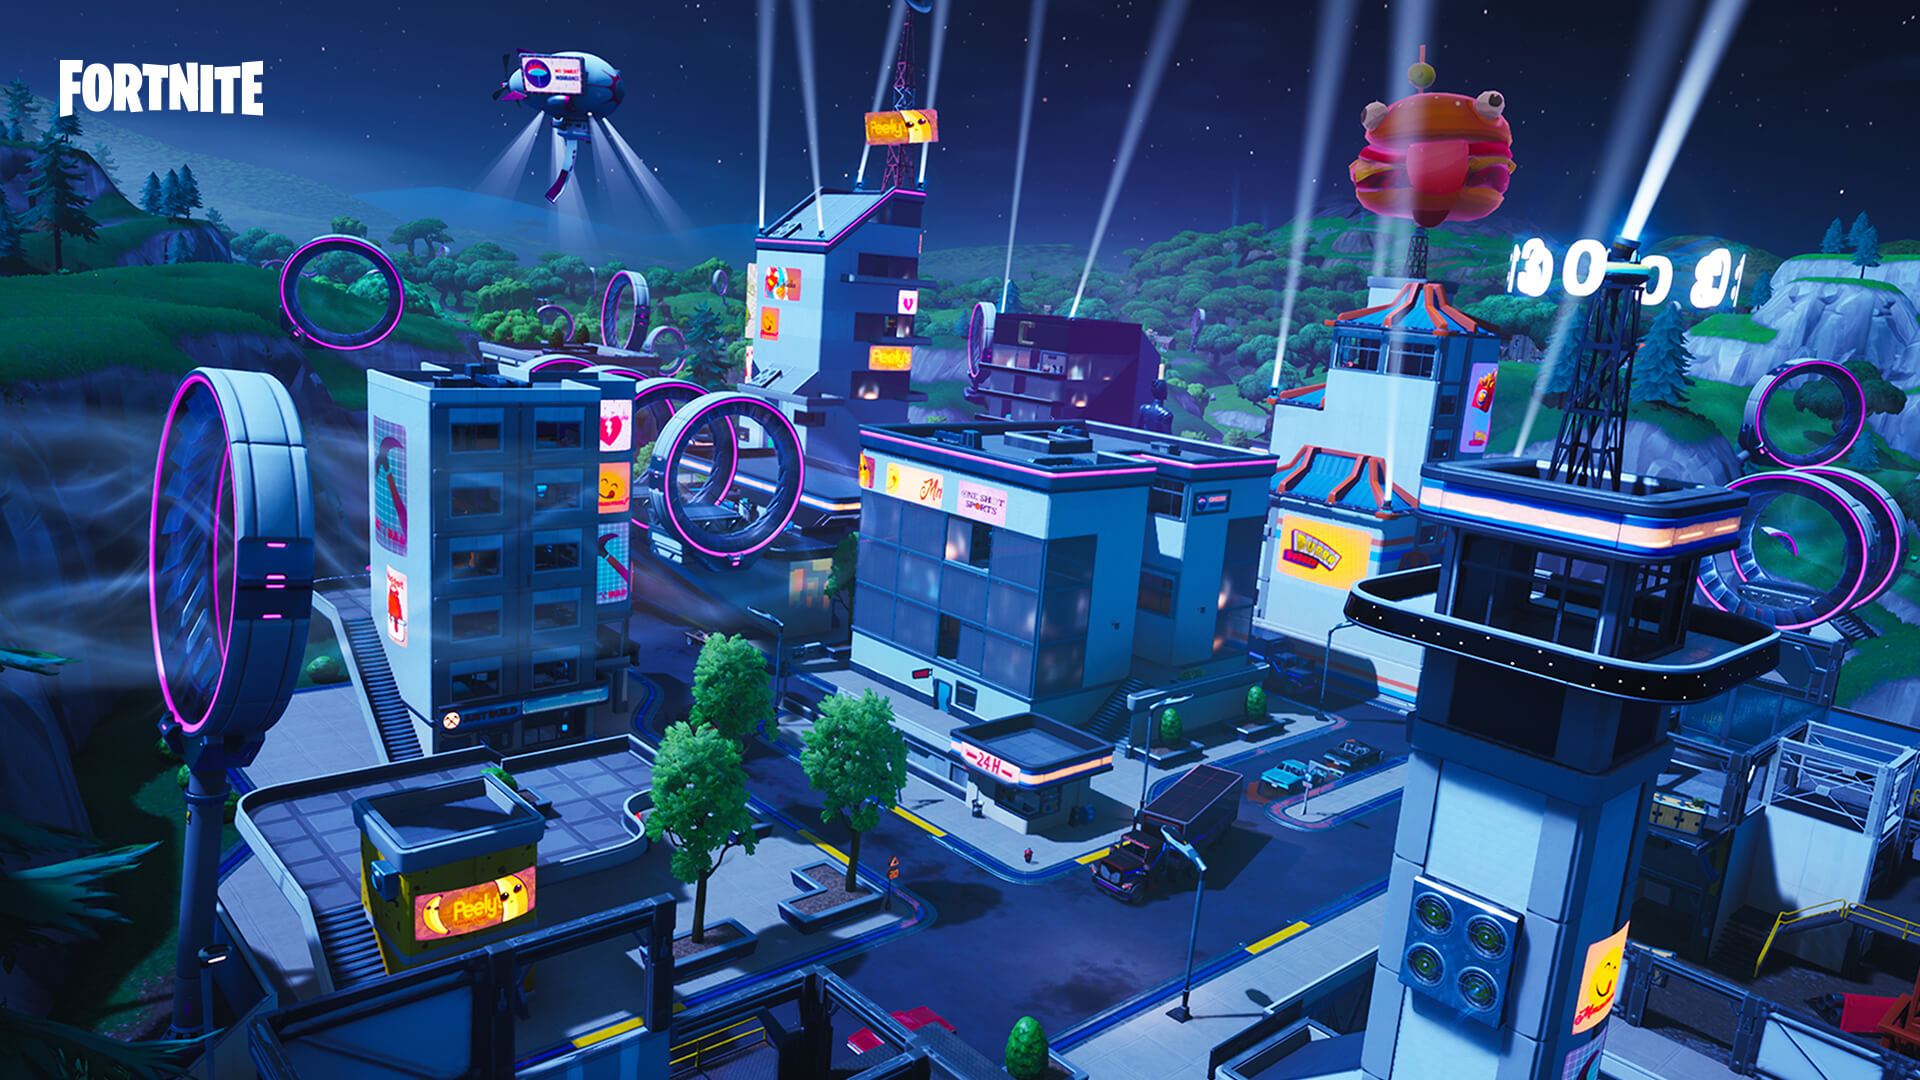 Fortnite Season Kicks Off As Tilted Towers Gets A Makeover And